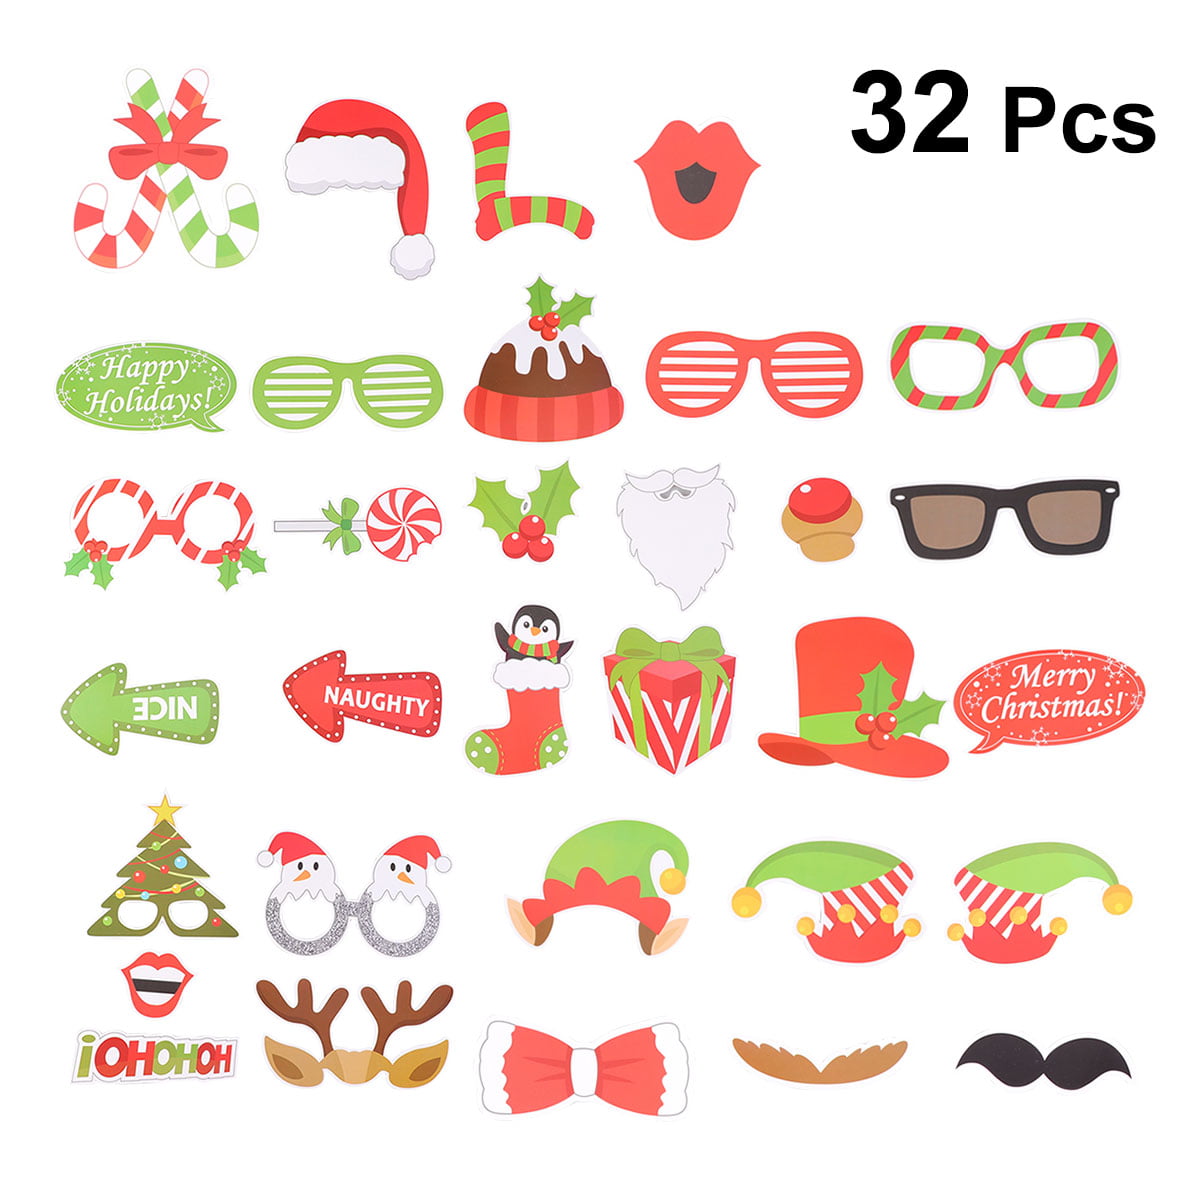 Trimming Shop 38pcs Merry Christmas Photo Booth Props Assorted Design Xmas Party Selfie Photo Props DIY Festive Decorations Set Camera Posing Supplies